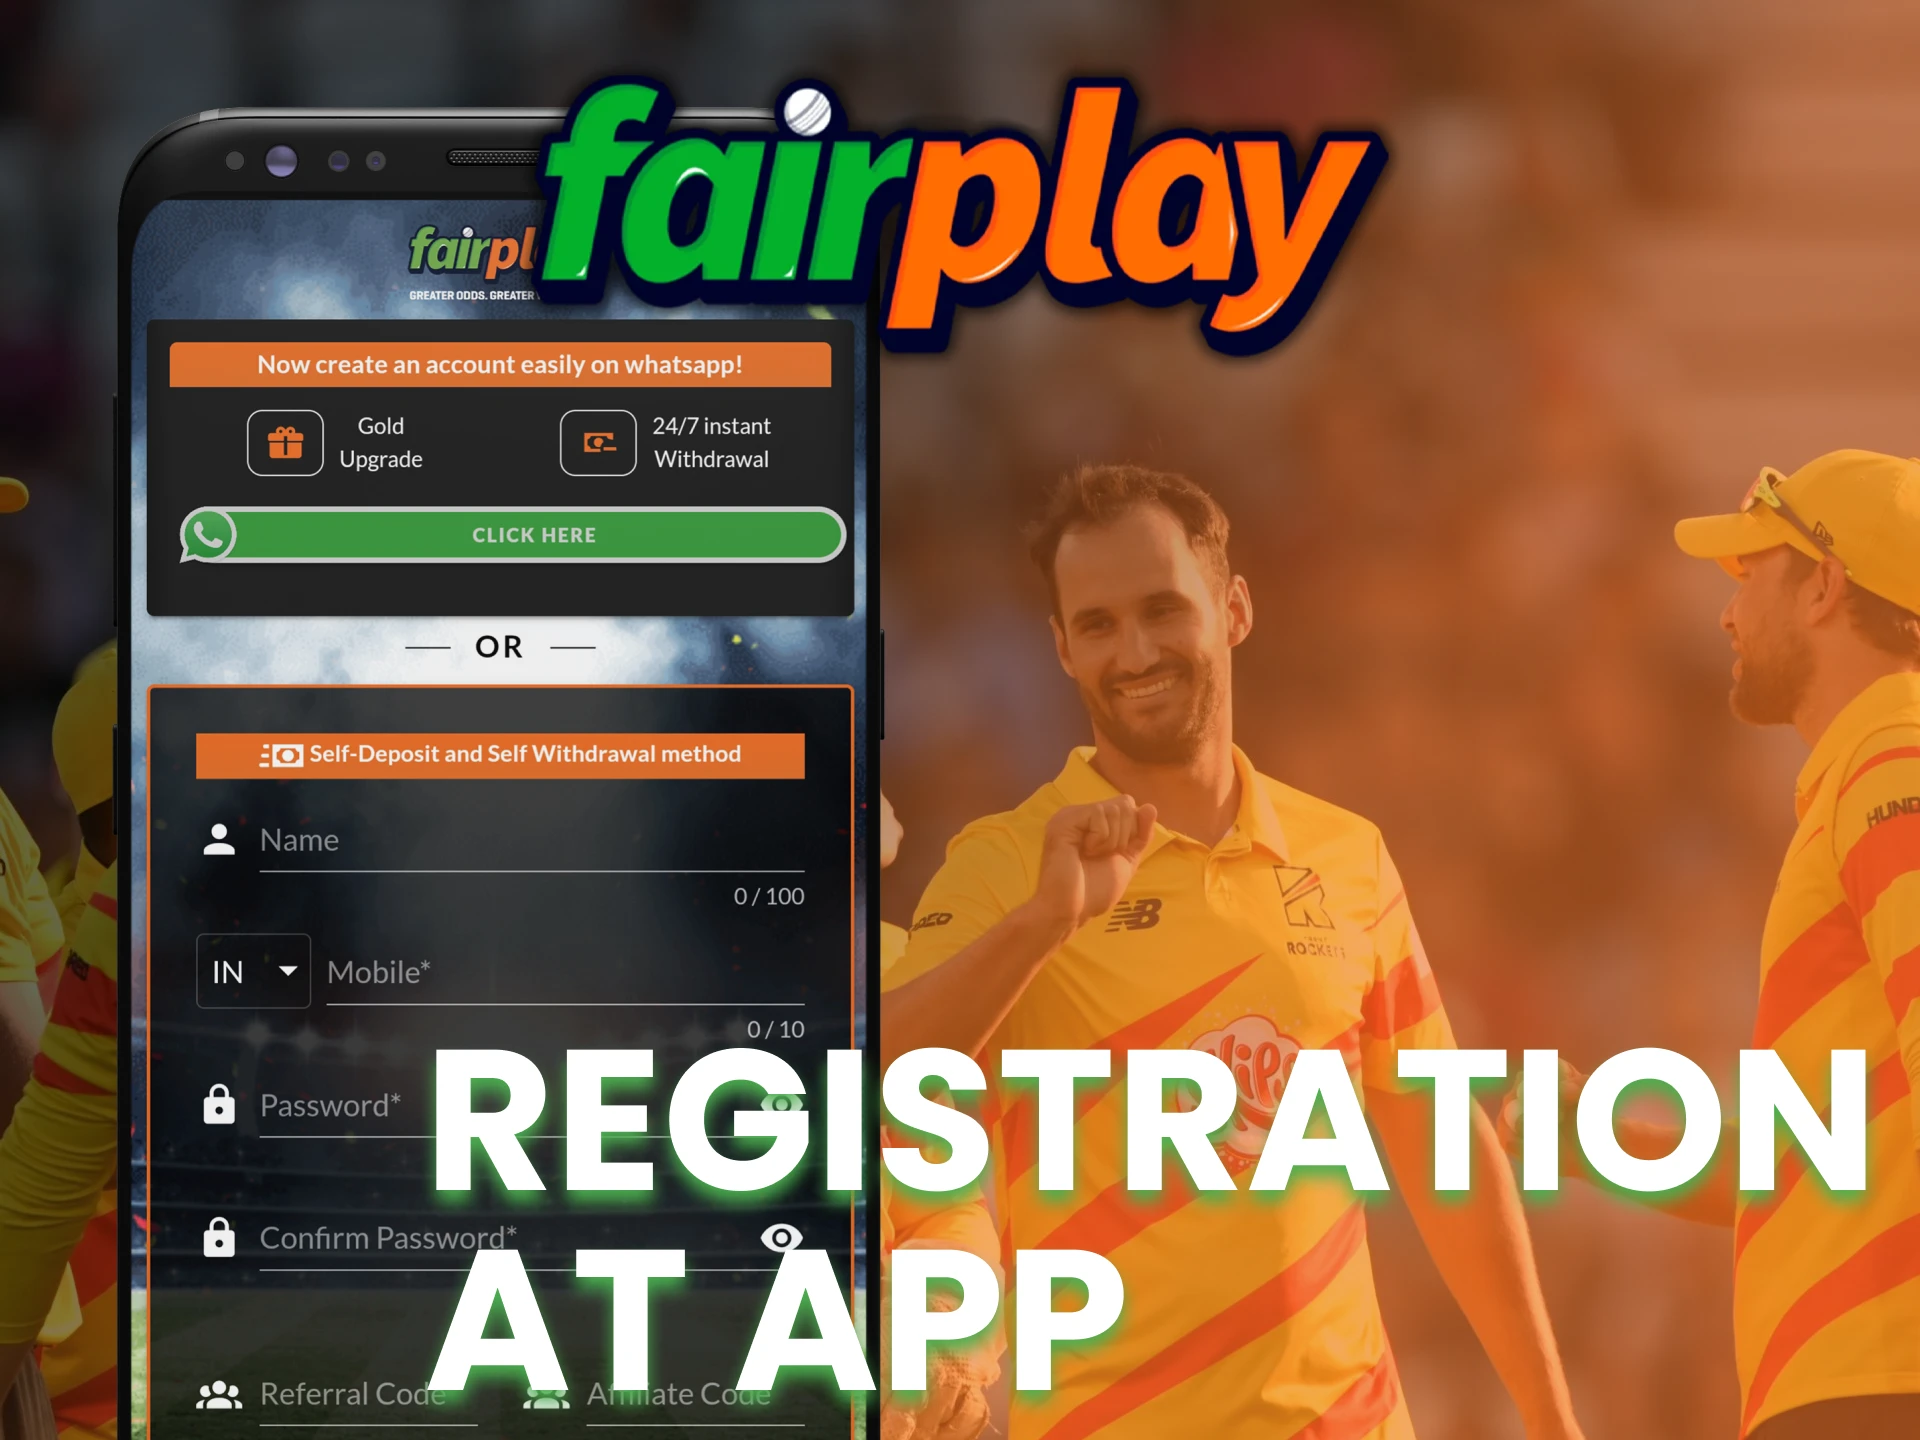 Register quicker with Fairplay app.